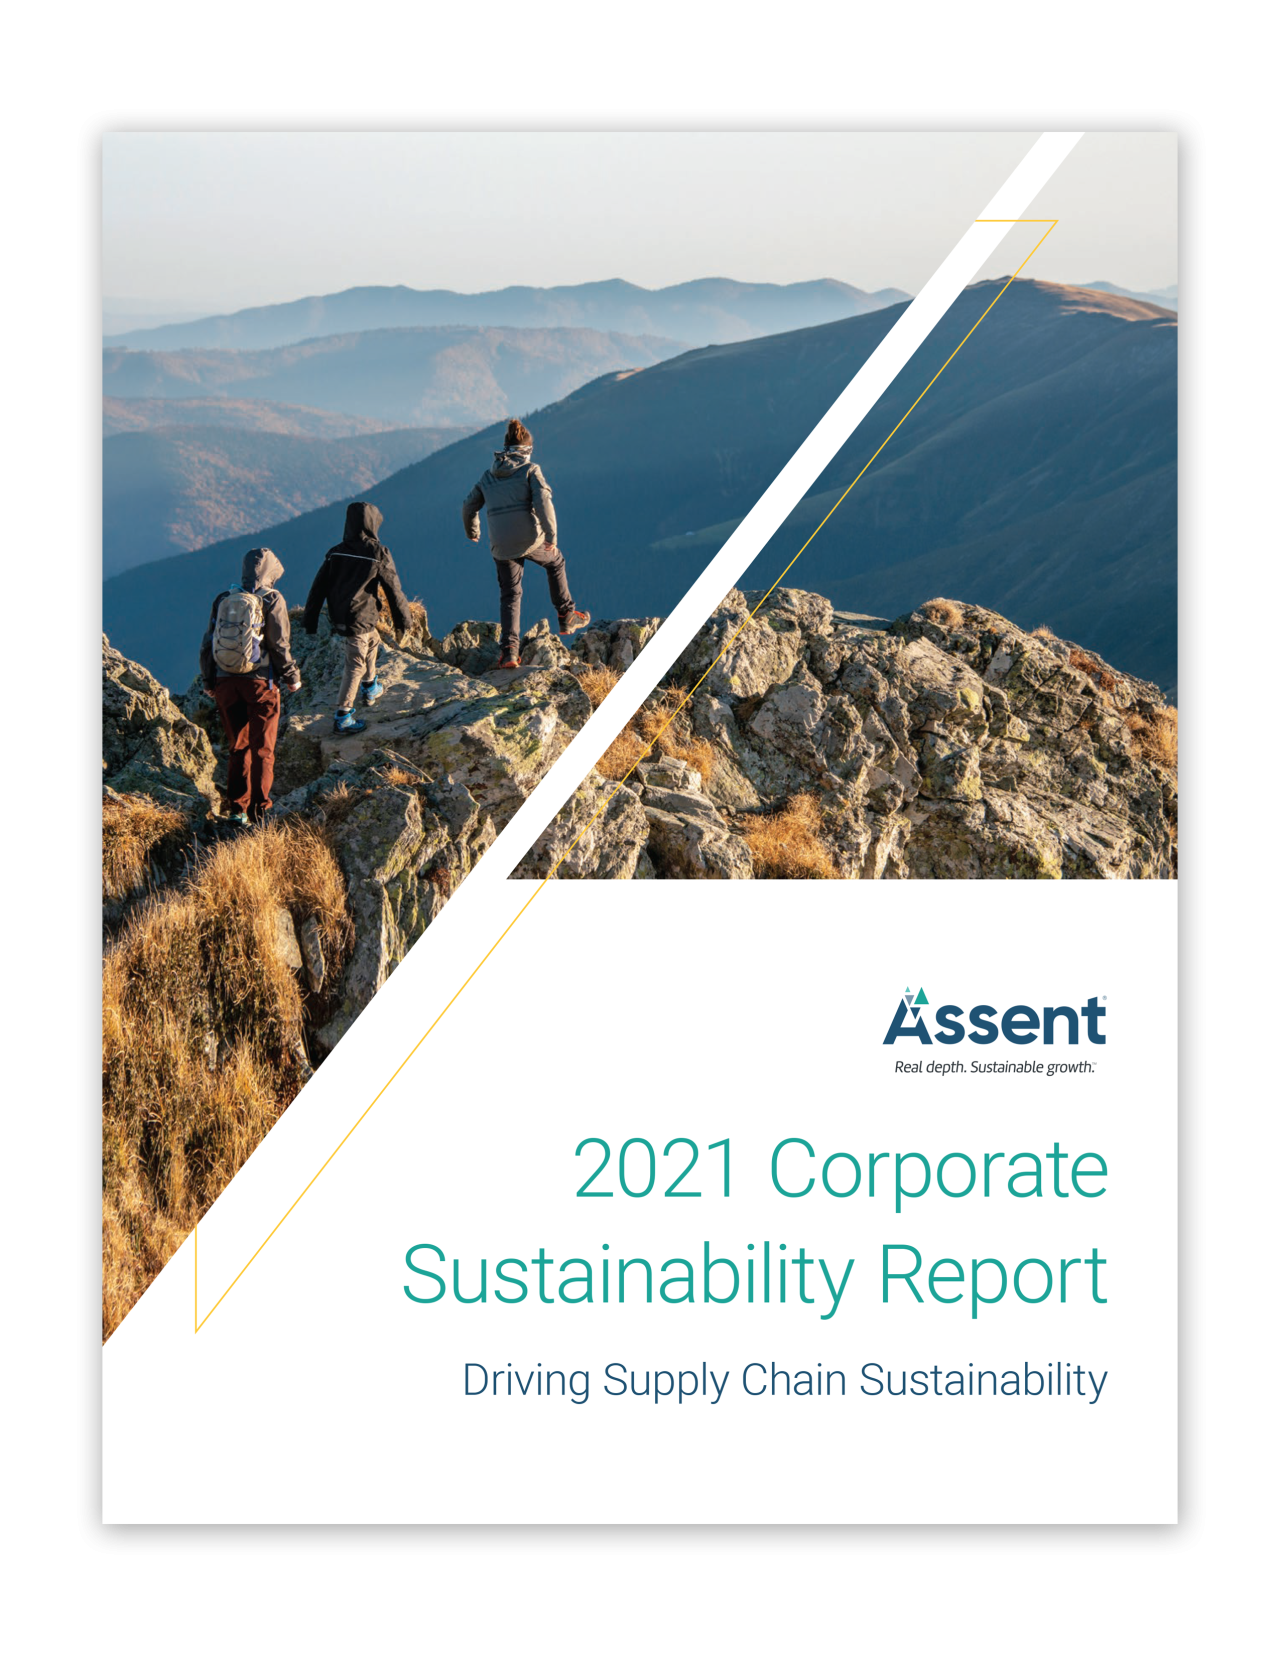 Cover of Assent's 2021 CSR report